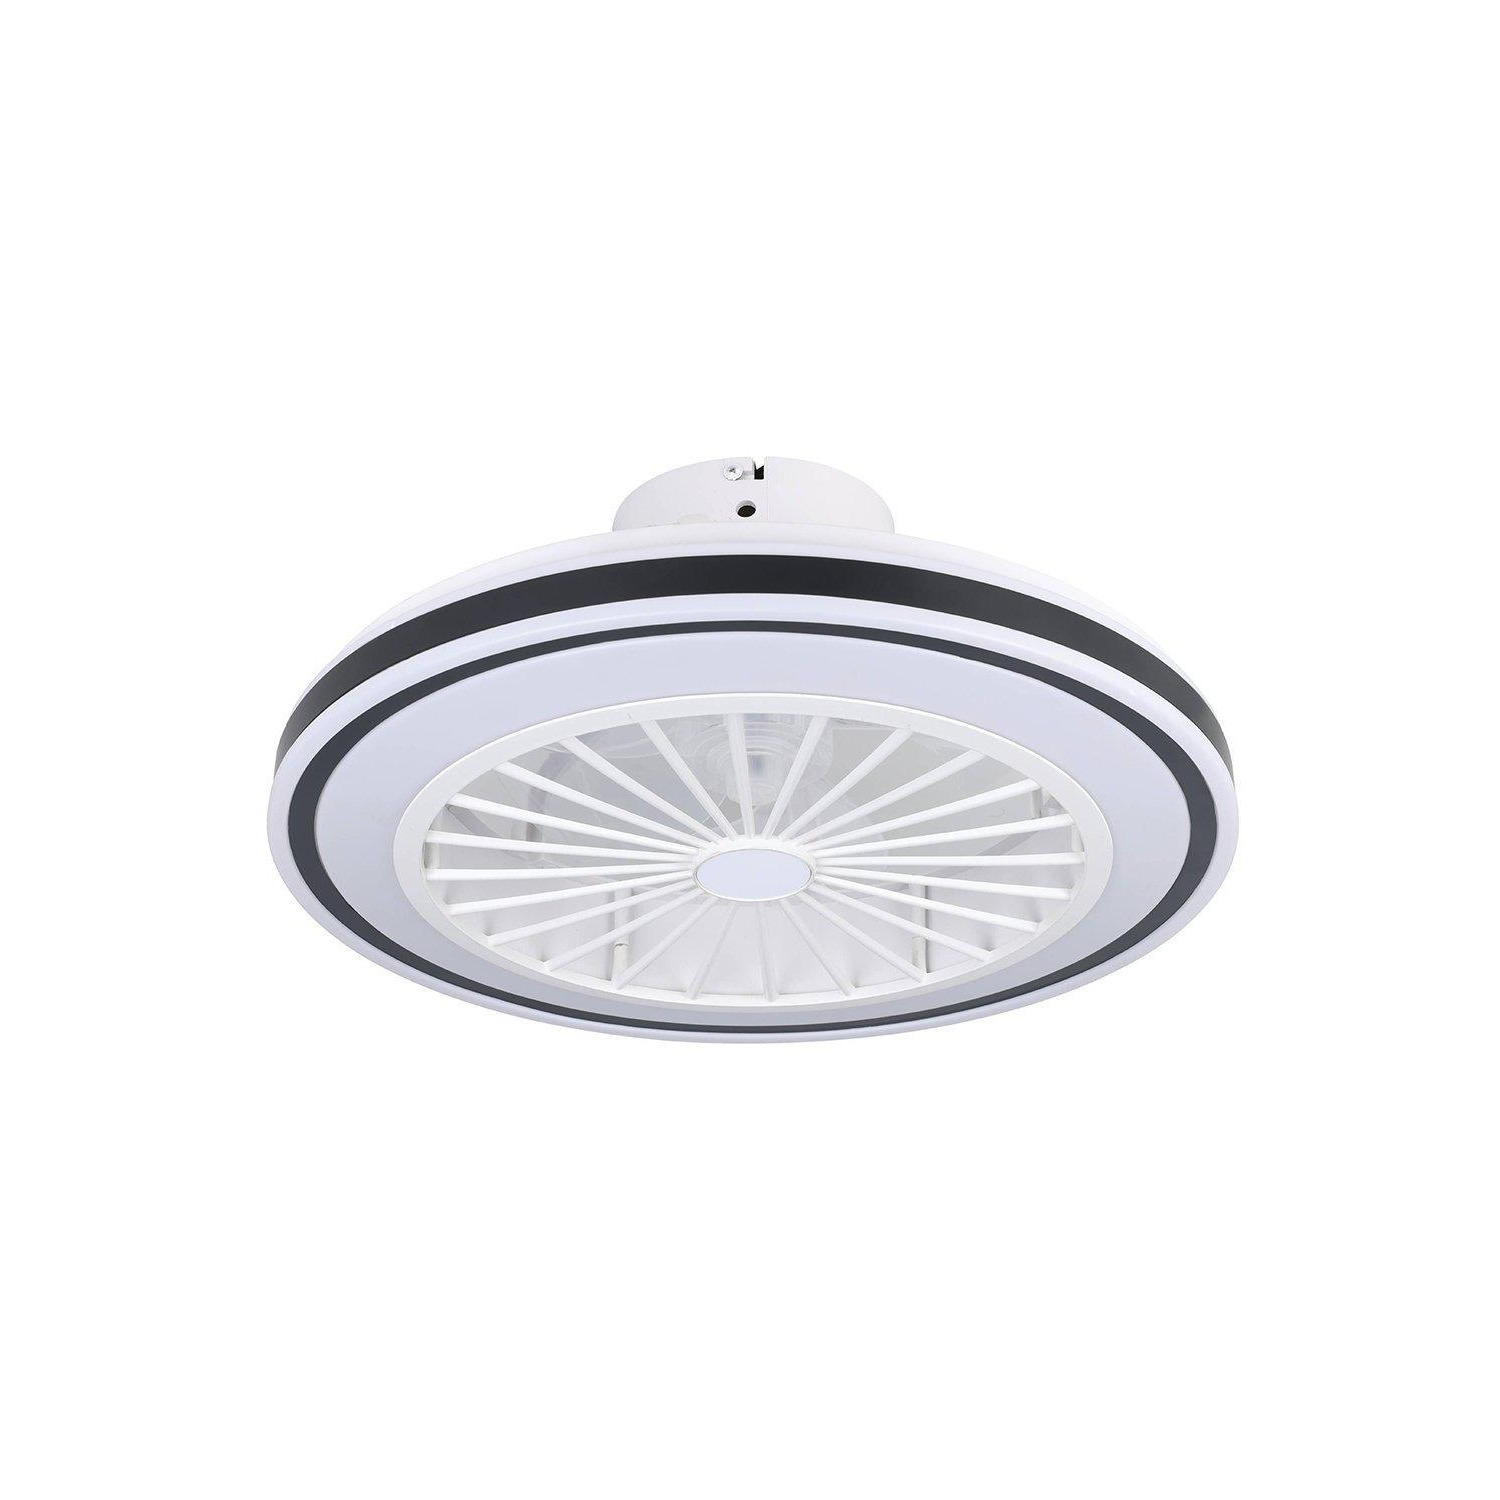 Almeria Compact White Ceiling Fan With Integrated LEDs - image 1